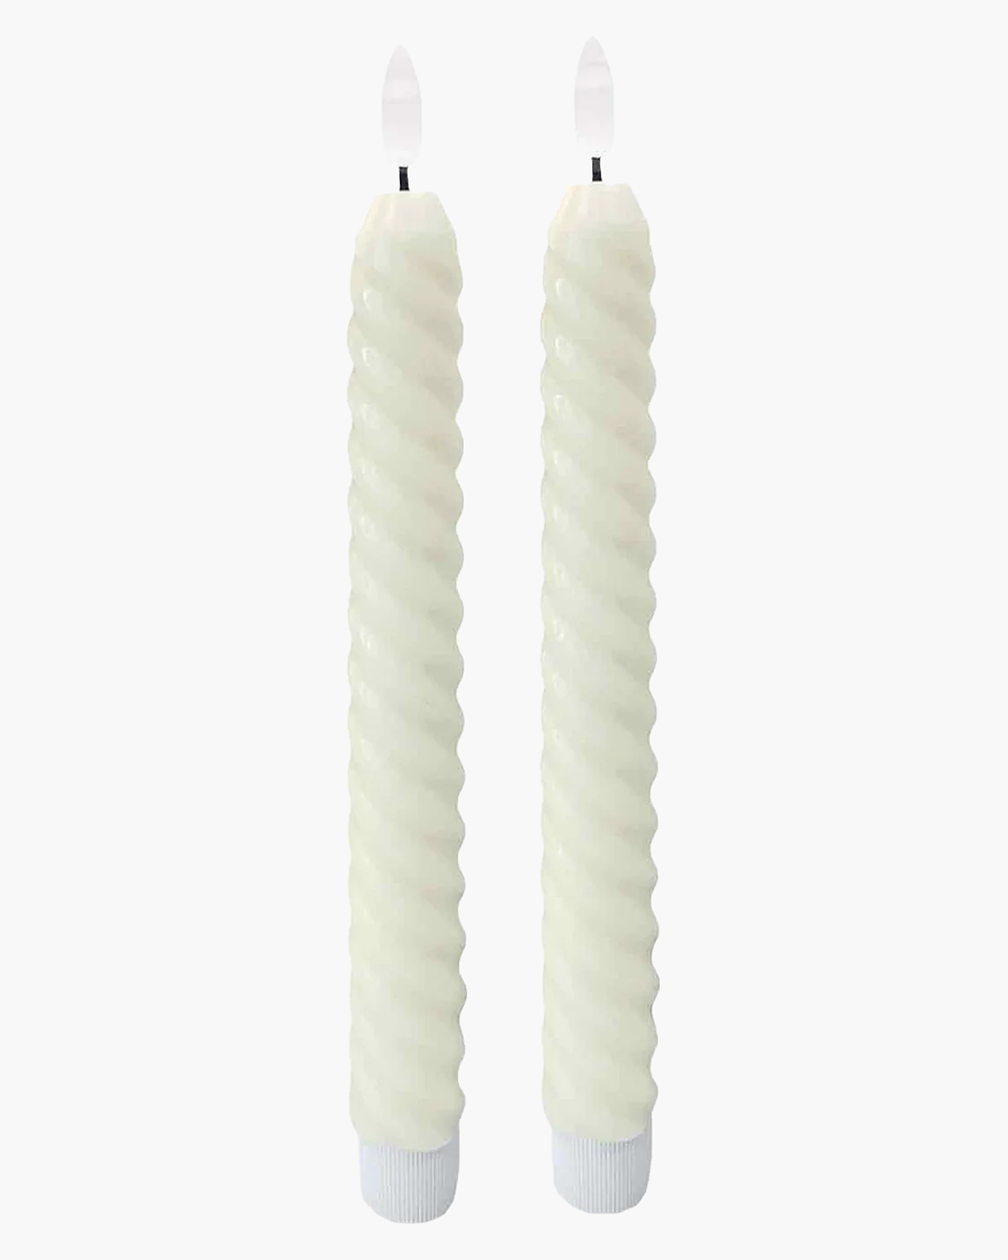 2 FLAMBEAUX LED CANDLES NATURAL IVORY WAX D2.4 H25 CM